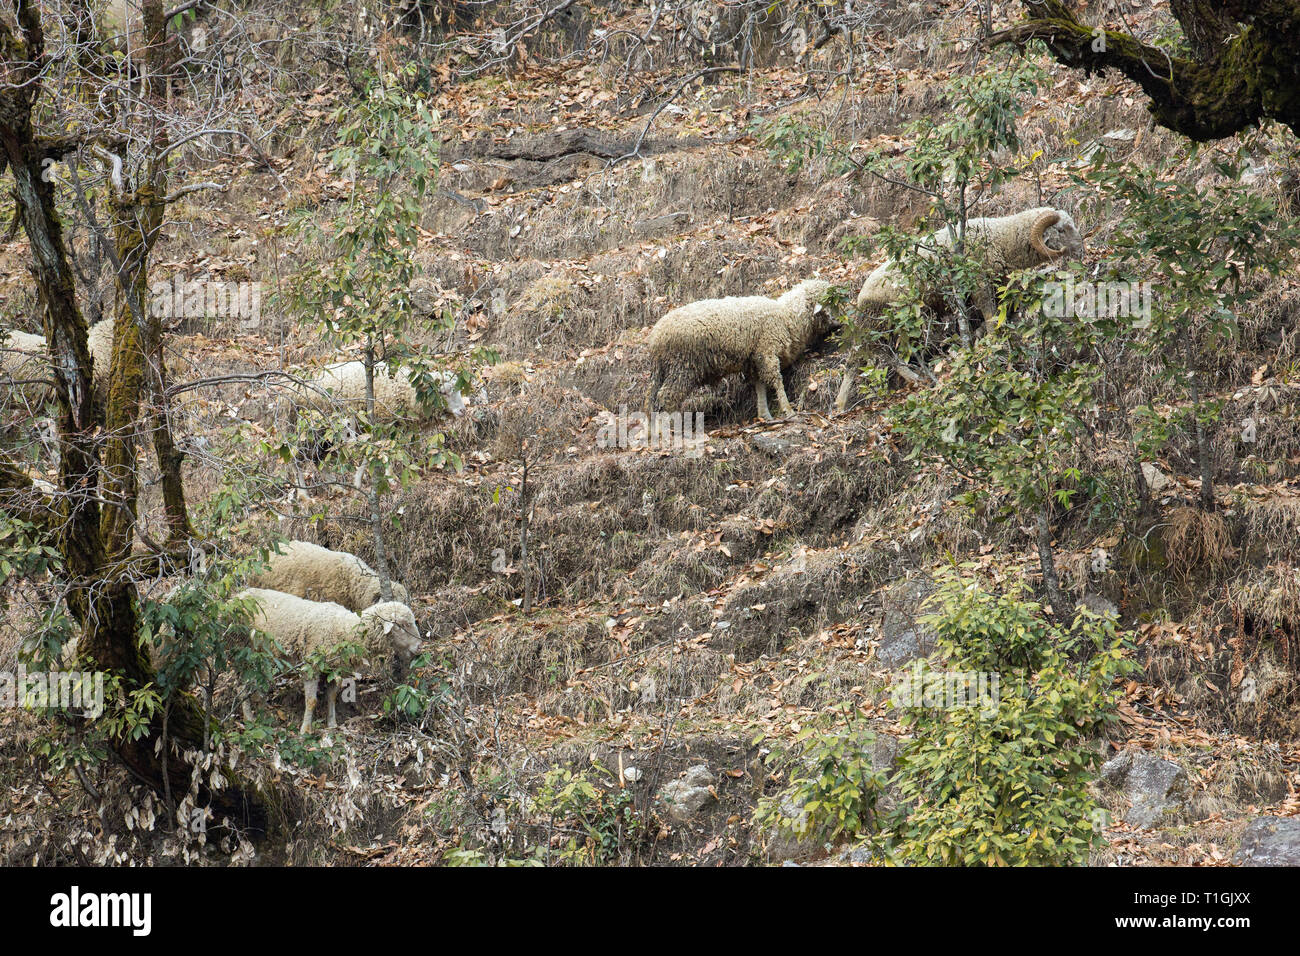 Hungry Domestic Sheep (Ovis aries). Bitter winter weather, January, February, forcing animals to forage on any scant, meager, green vegetation remaining. Himalayan foothills, India. Stock Photo